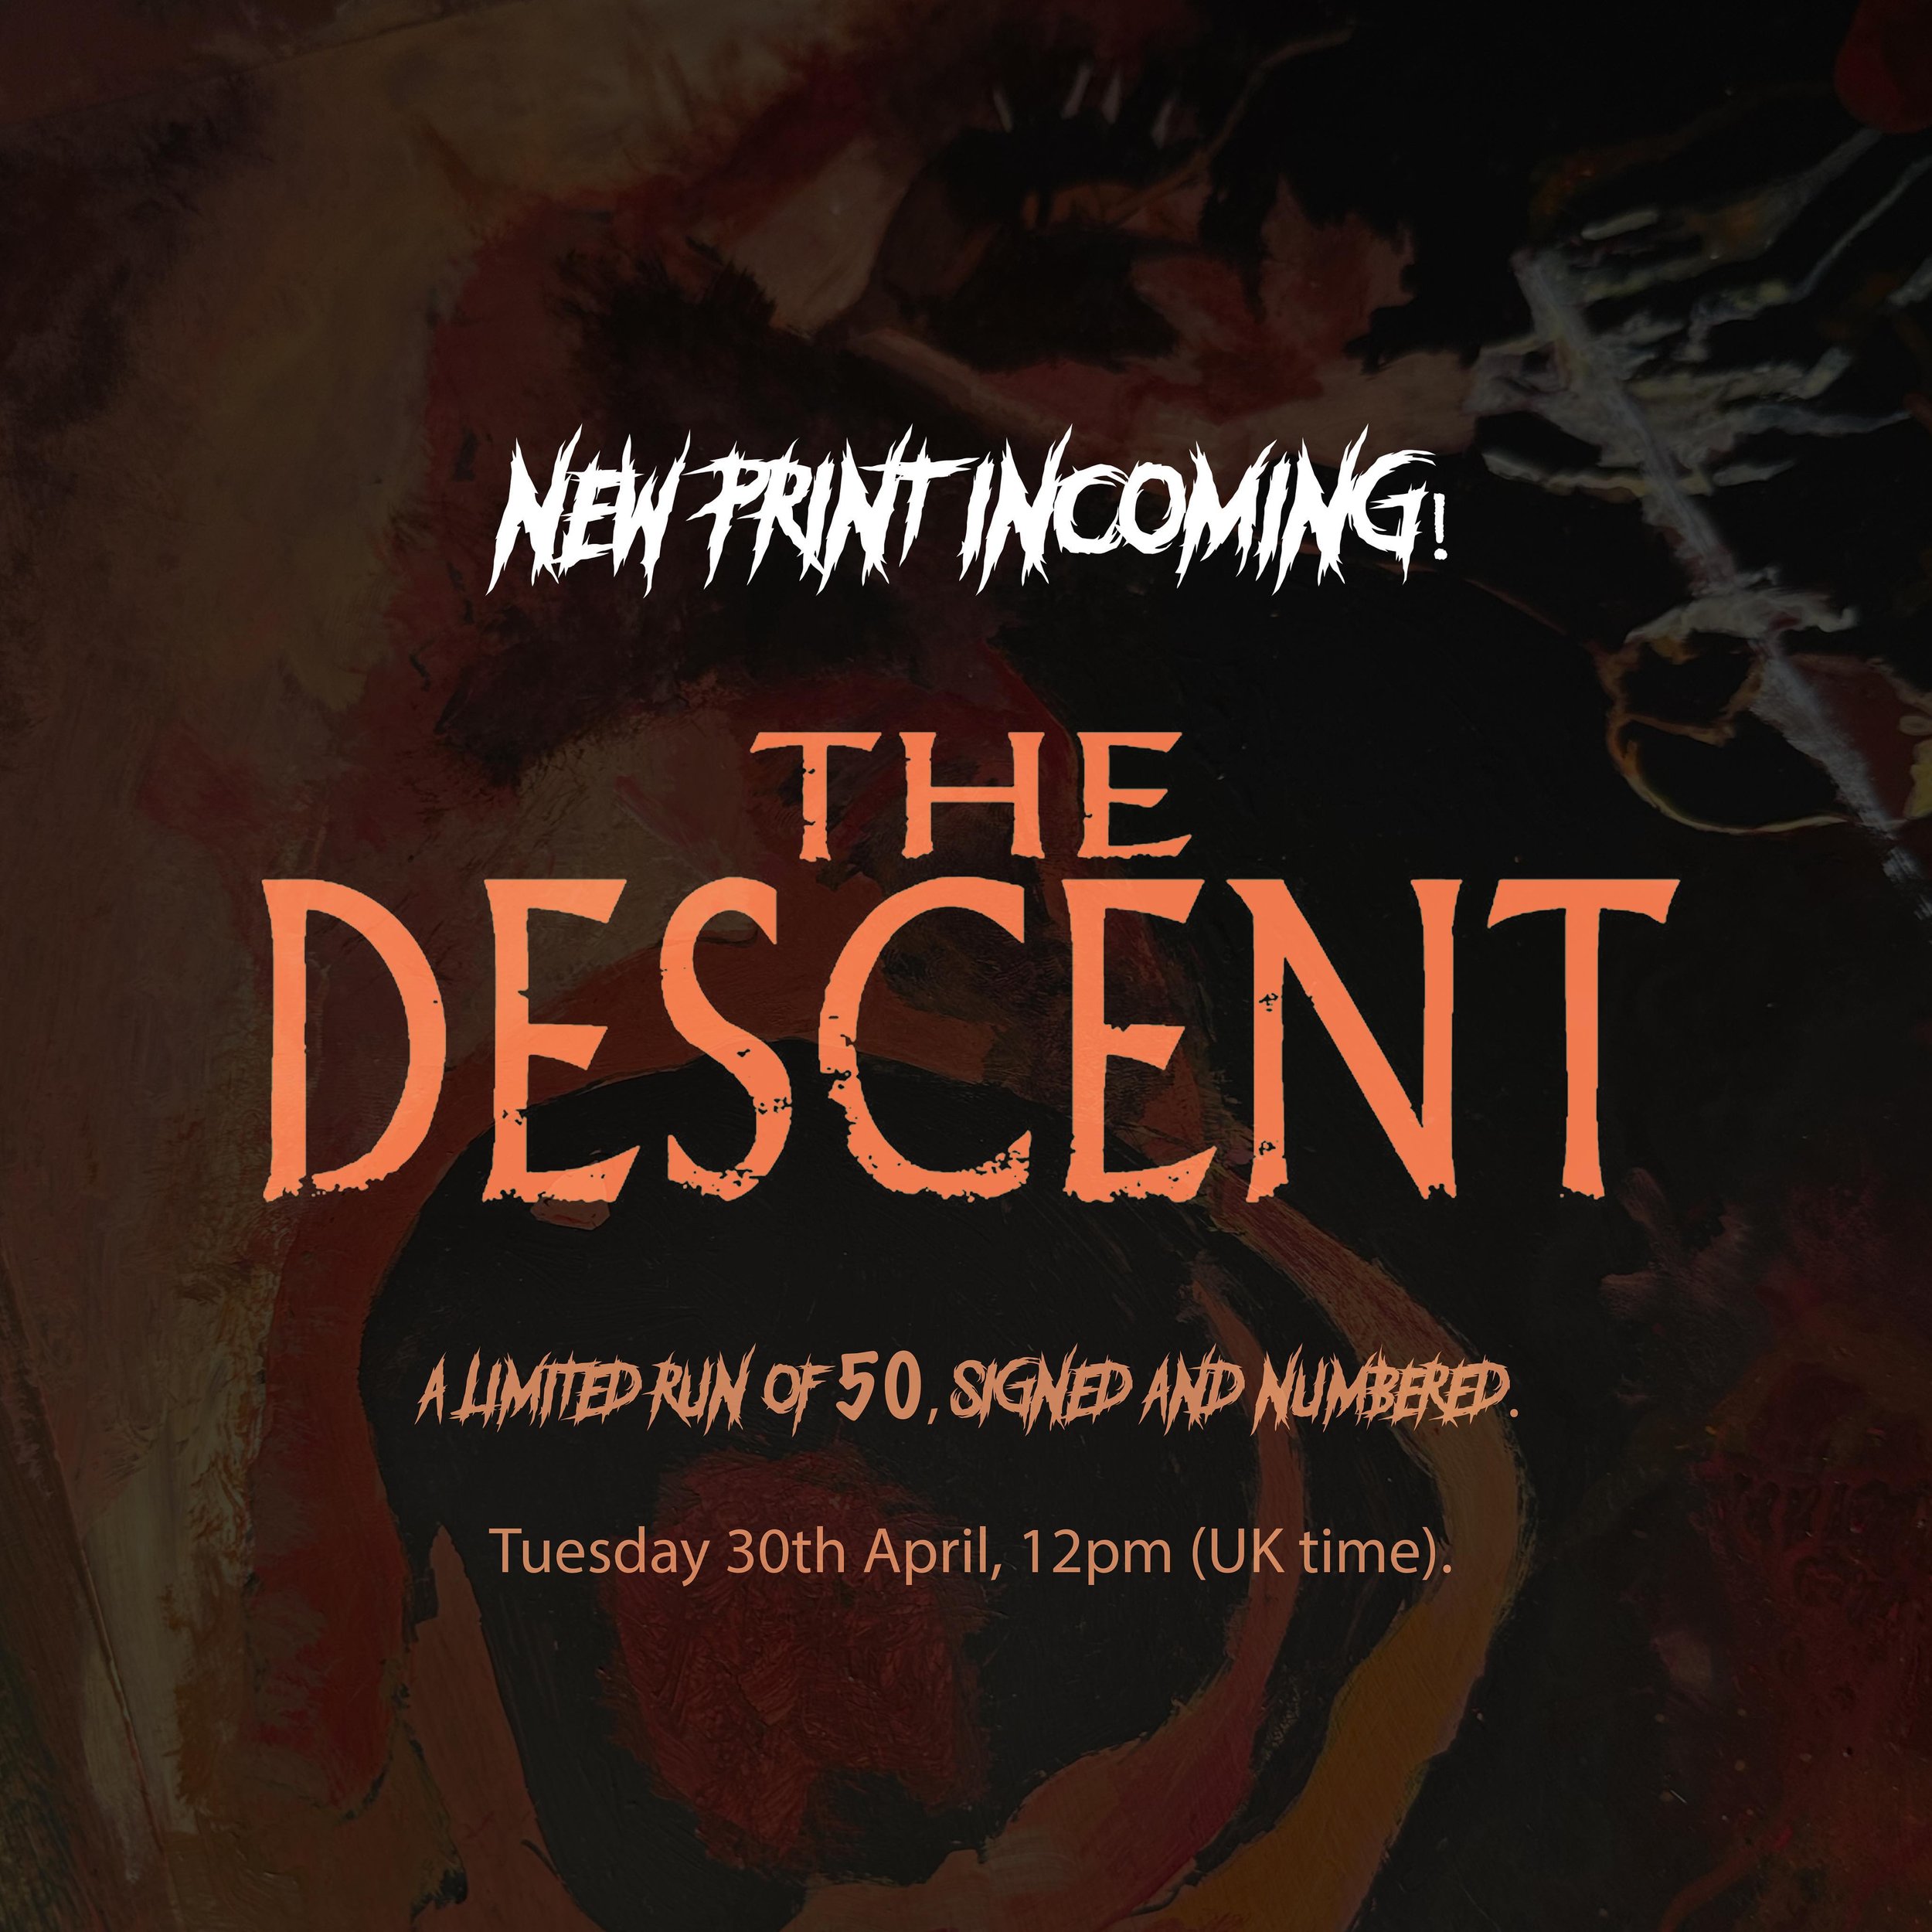 New print drop. This Tuesday 30th April, 12pm (UK time). 

My hand painted poster for The Descent. A limited signed and numbered run of 50. 

#thedescent #horror #horrorart #printdrop #alternativemovieposter #horrorart #horrorartist #modernhorror